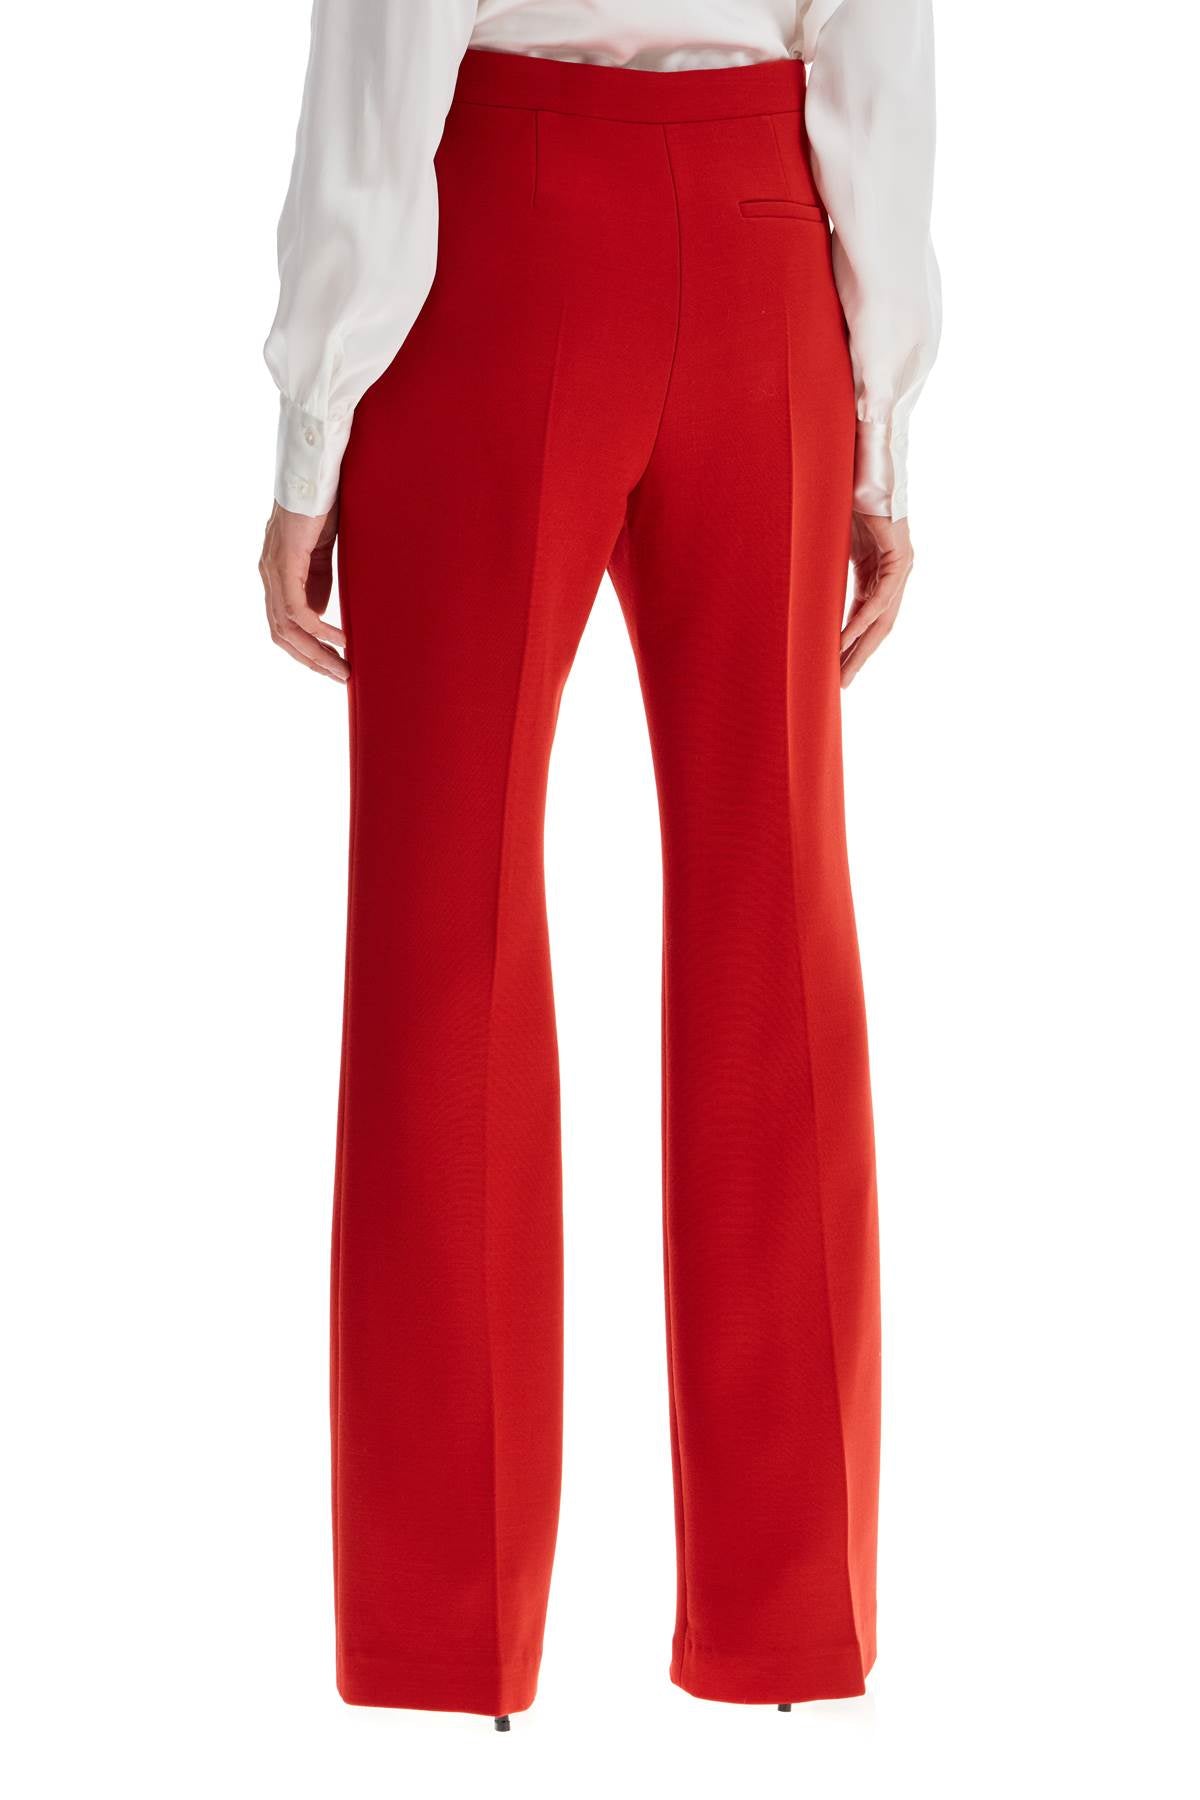 Alessandra Rich Tailored Wool Bootcut Trousers For